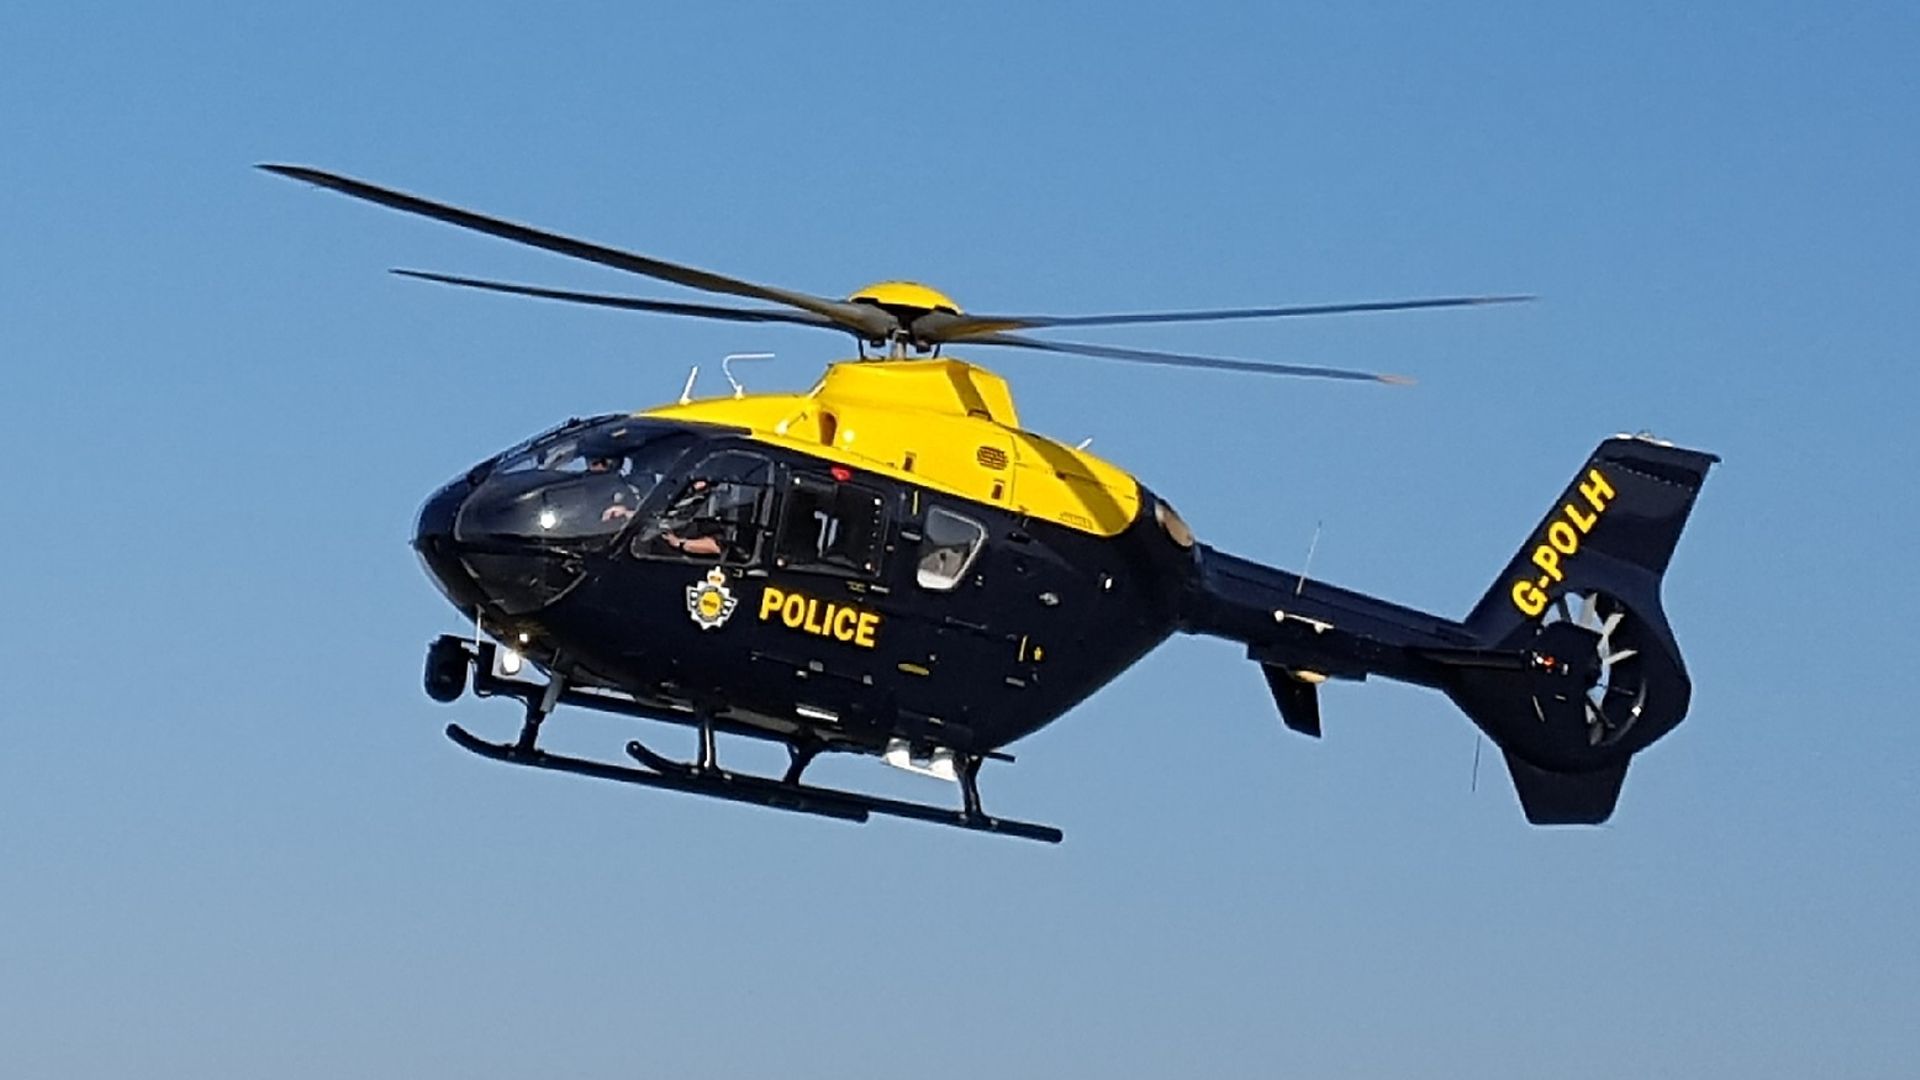 Oxford circled by police helicopter as police cars descend on Clive Road